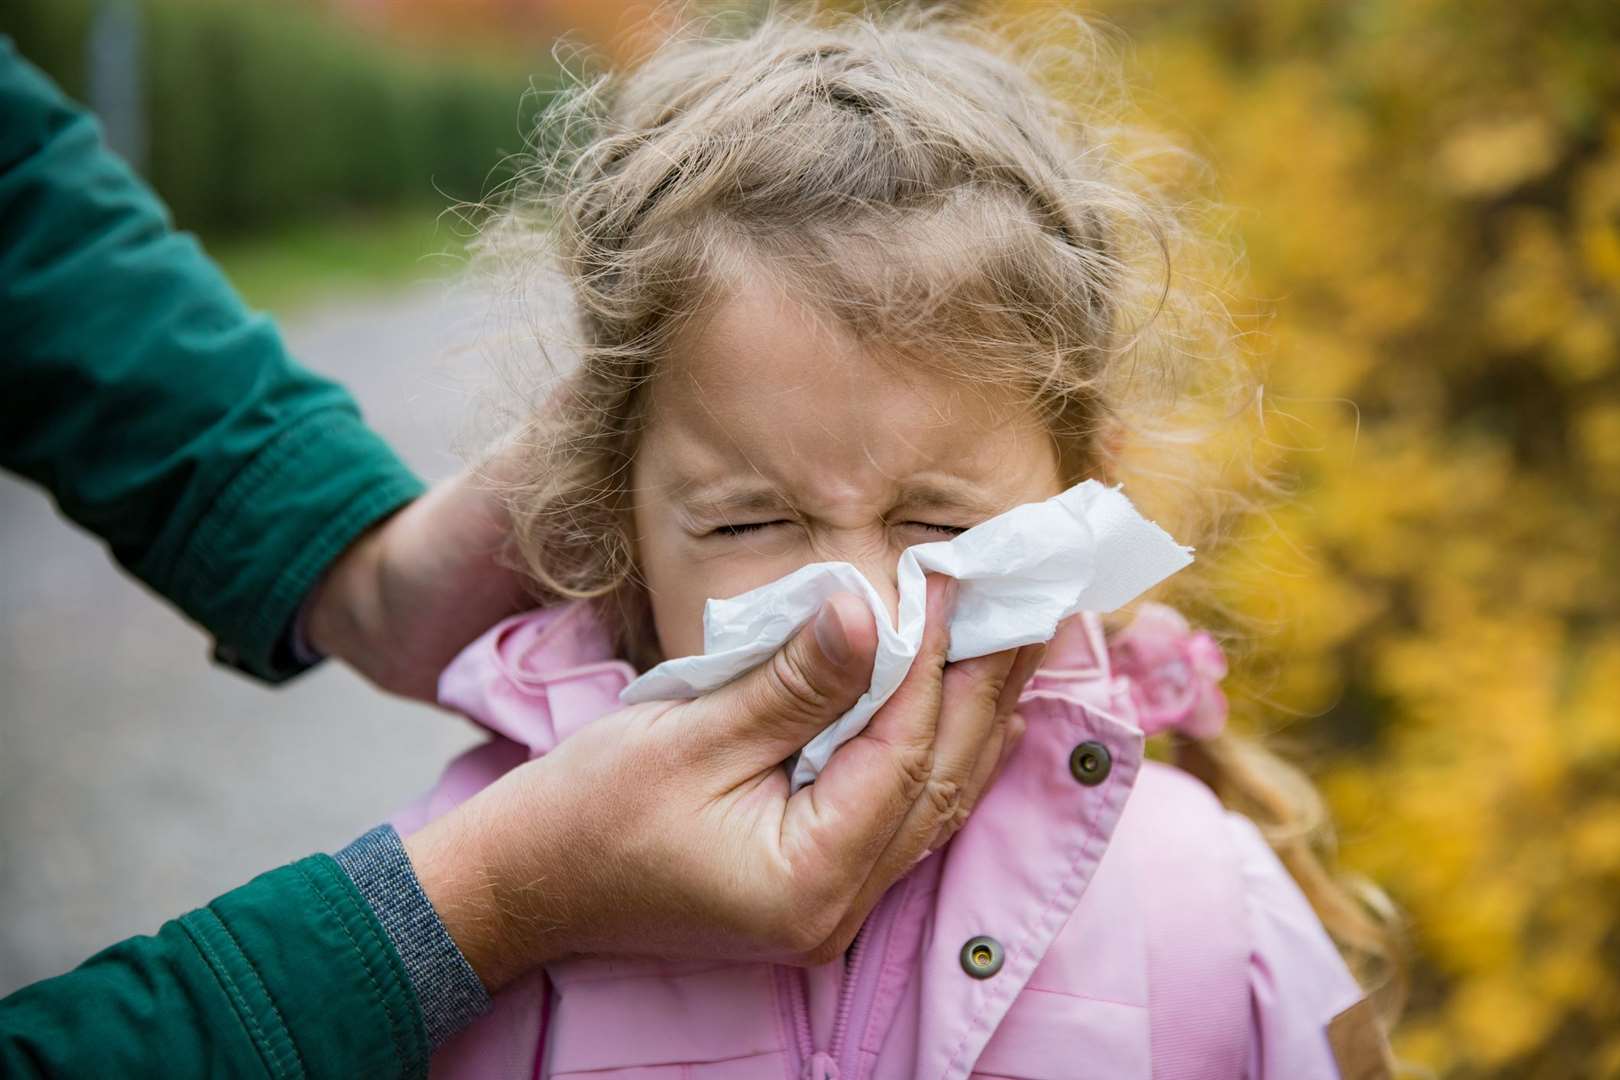 Sneezing and running noses are not coronavirus symptoms, parents have been told